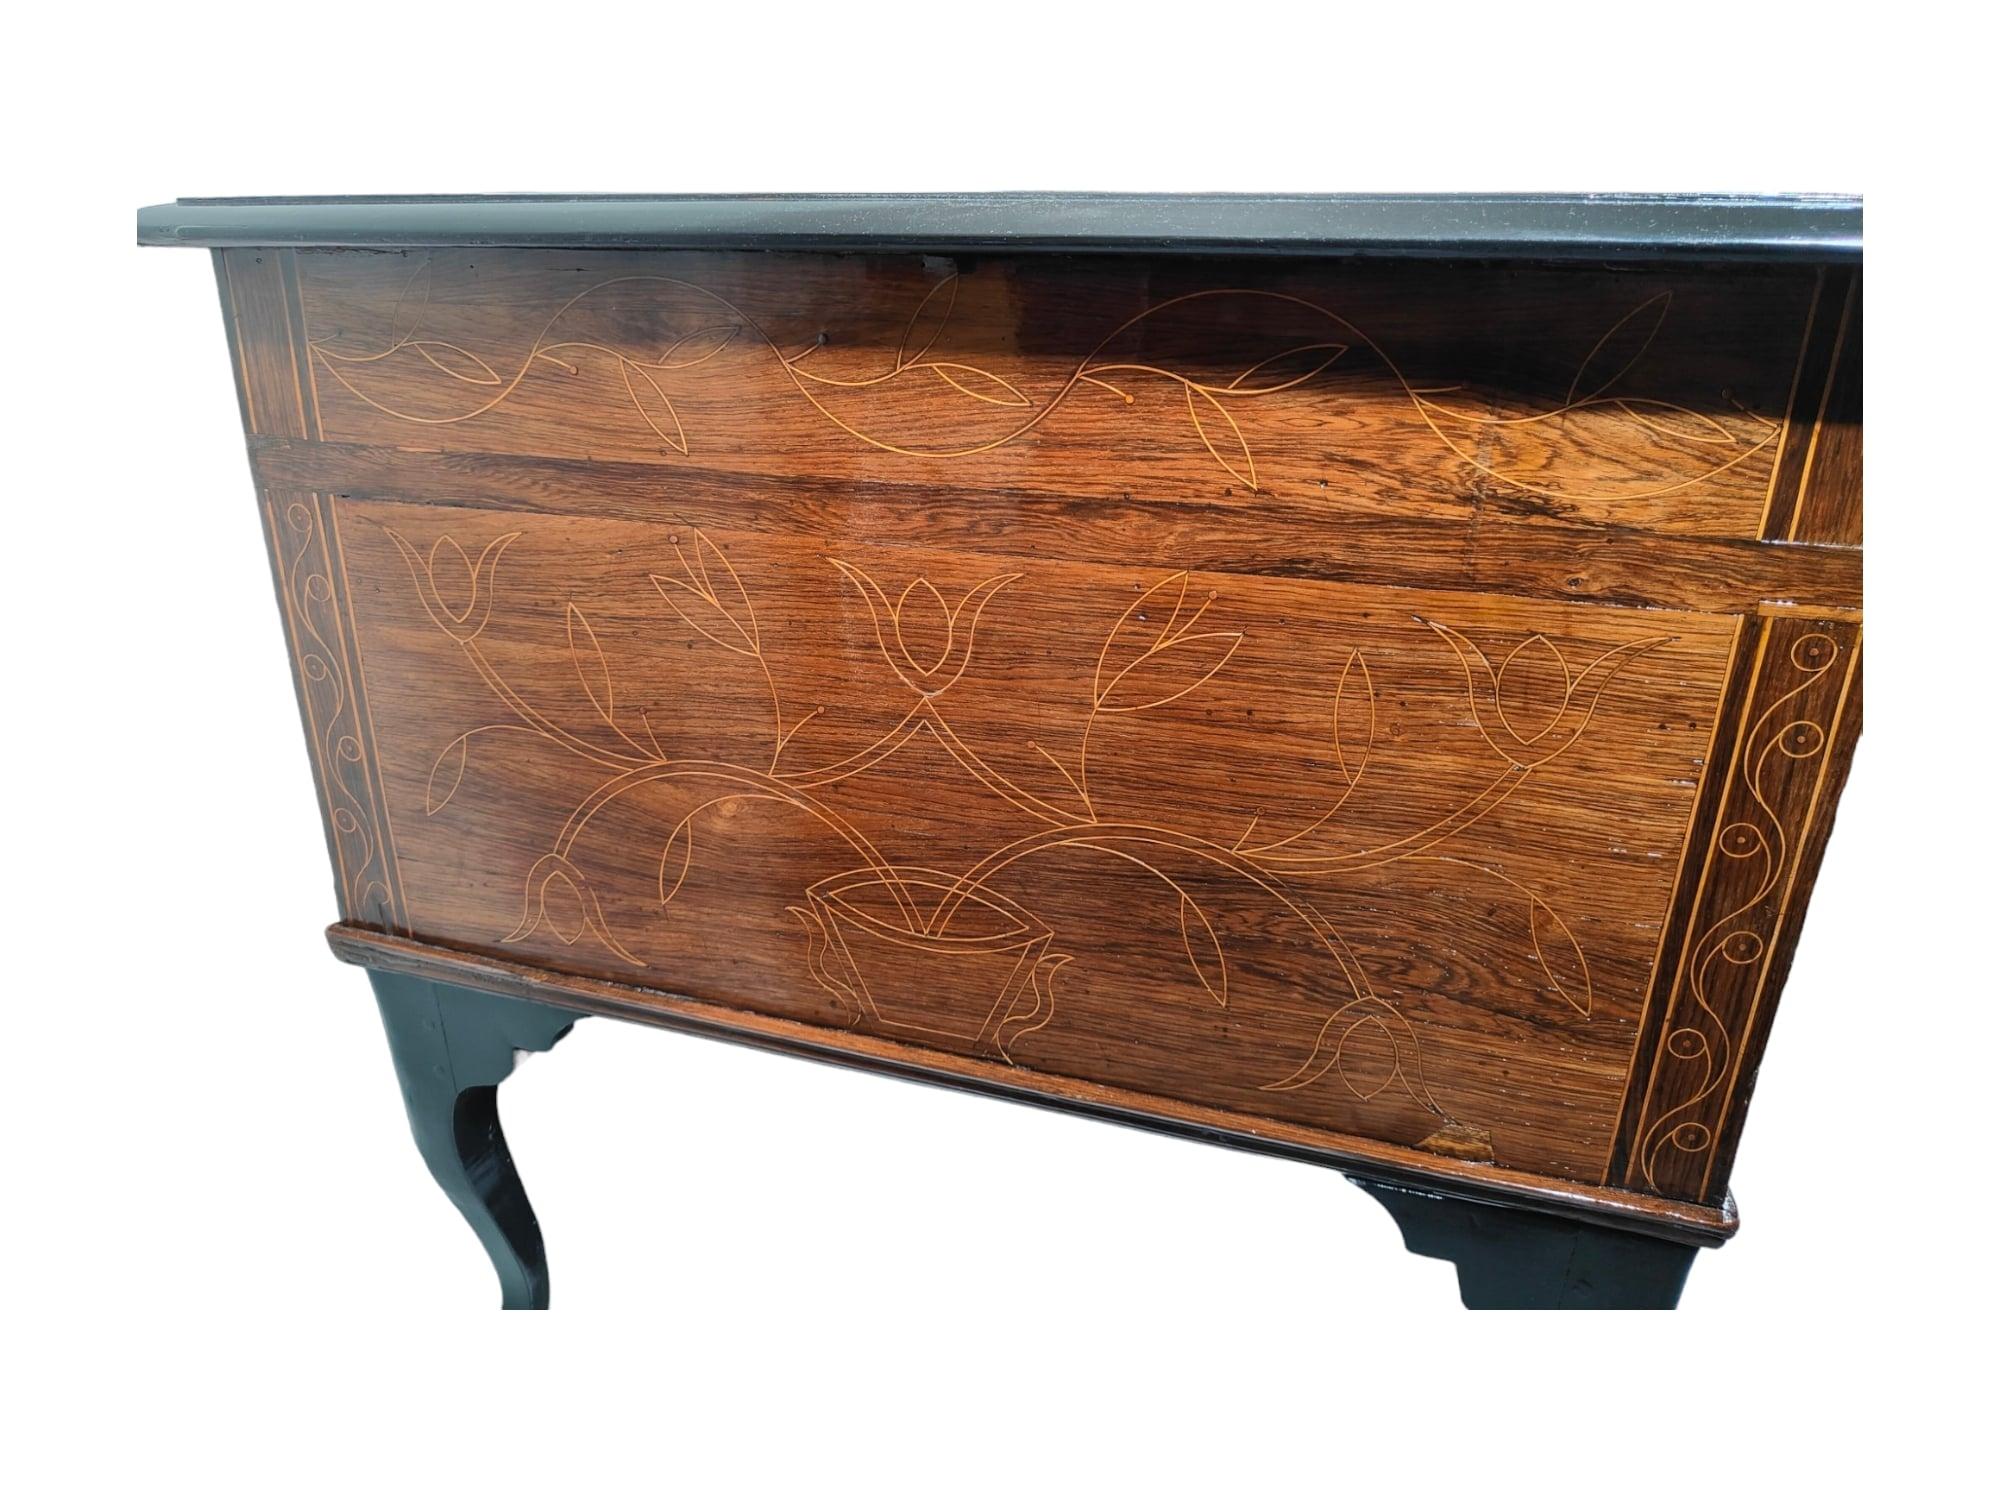 Philippe V Desk From the 17th Century For Sale 13